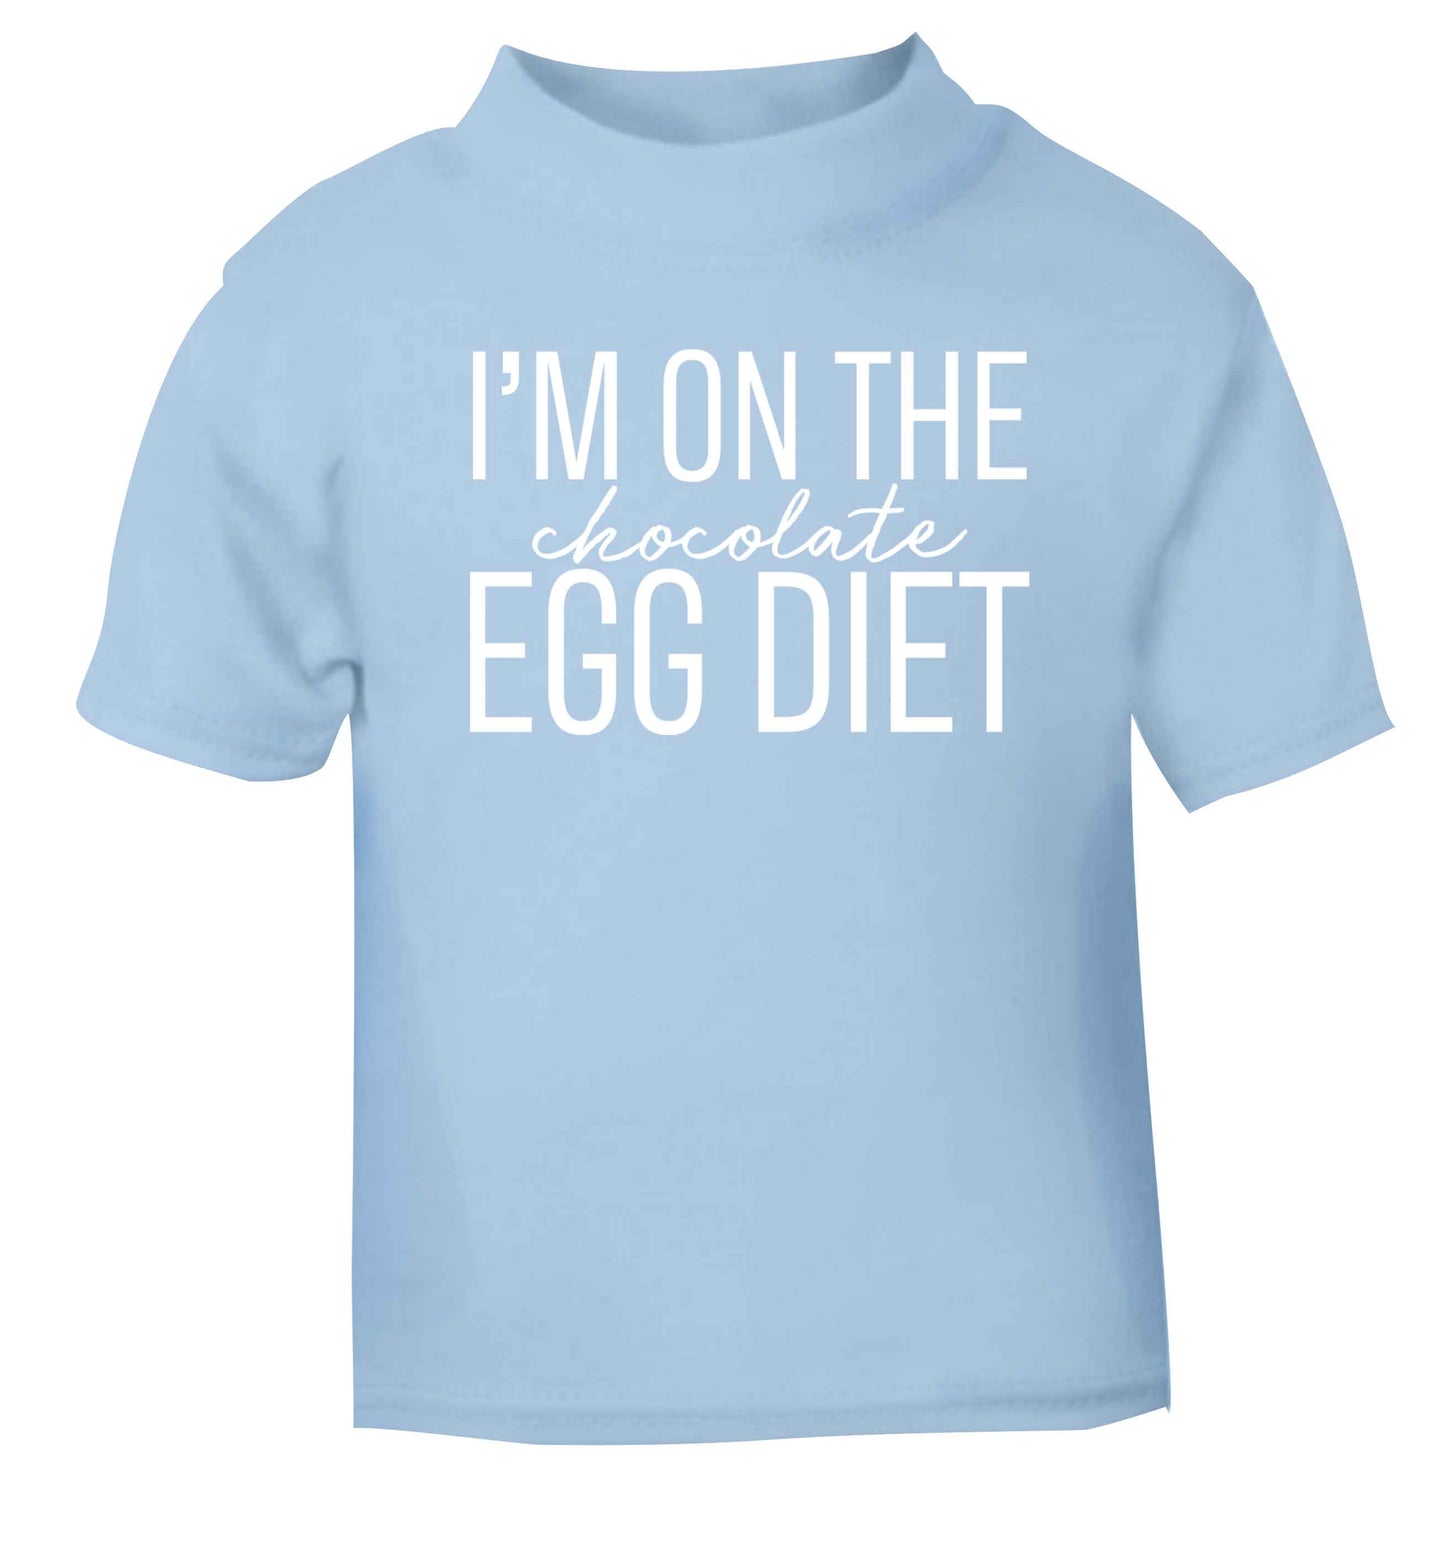 I'm on the chocolate egg diet light blue baby toddler Tshirt 2 Years